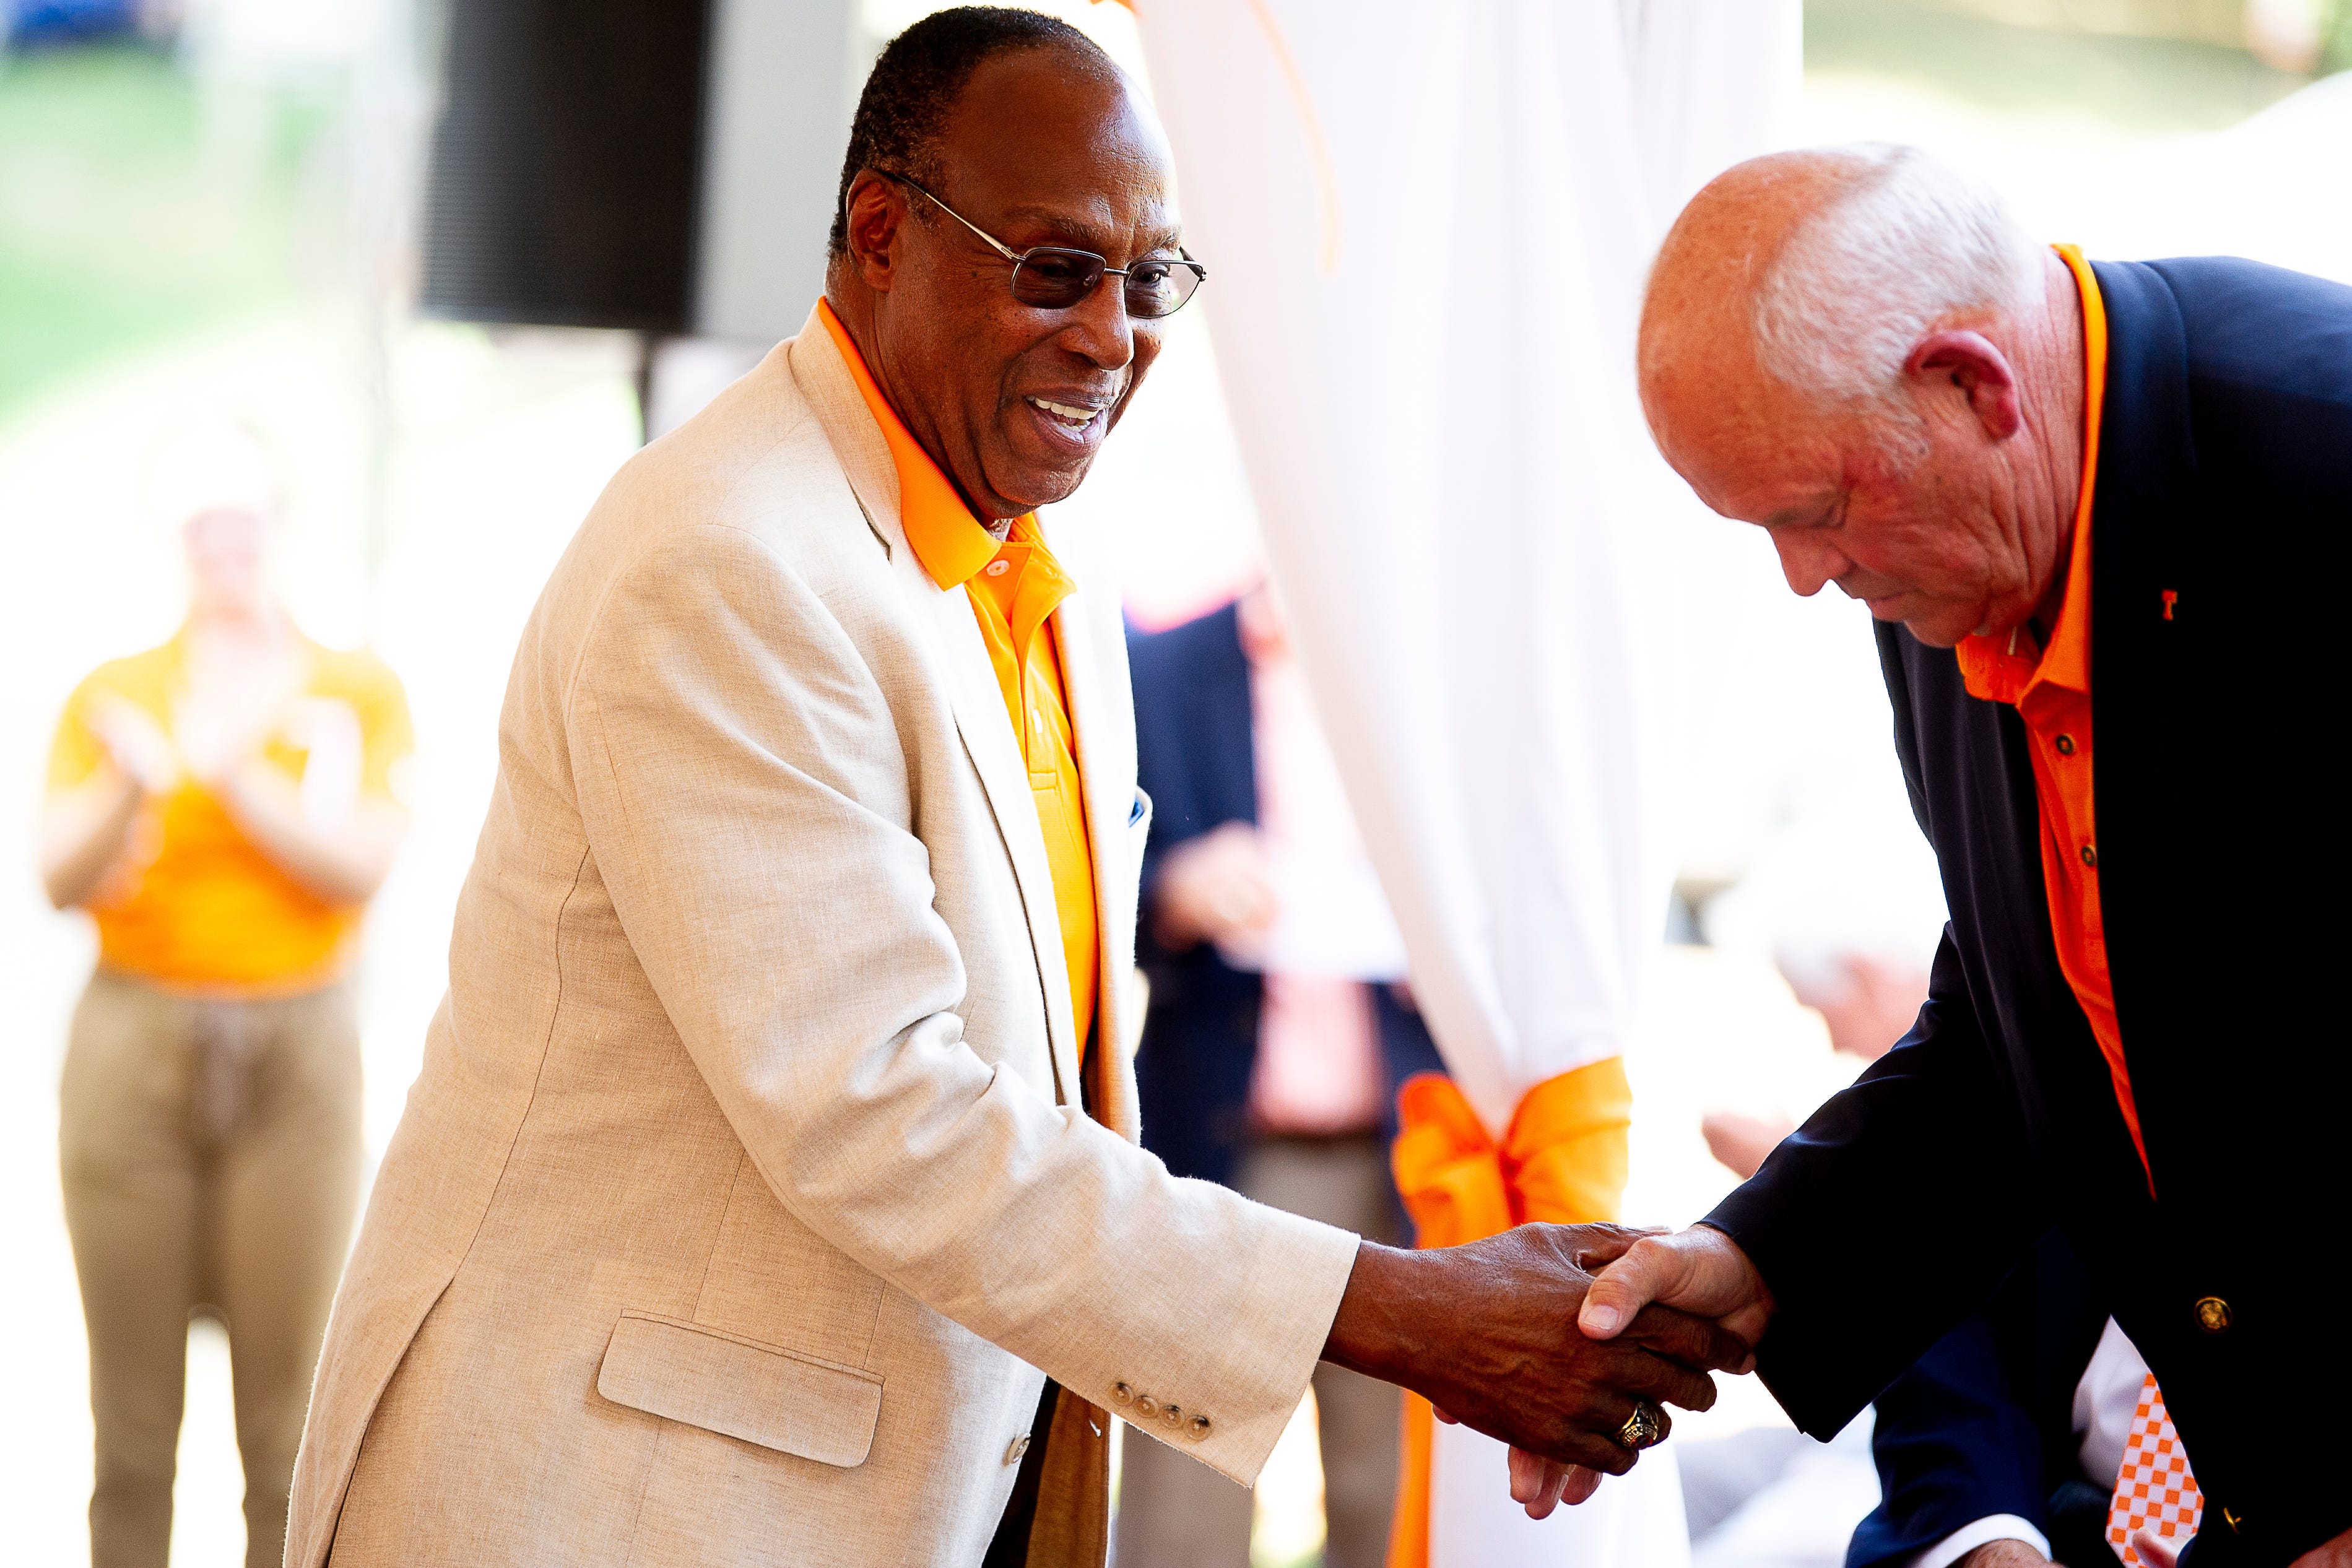 Former Tennessee football wide receiver and the first African American to play for the Vols Lester McClain is introduced during a dedication ceremony of the Doug Dickey Hall of Fame Plaza at the Neyland-Thompson Sports Complex in Knoxville, Tennessee on Friday, October 4, 2019. Dickey led UT to its second SEC title in 1969 and served as the Vols' Director of Athletics from 1986 to 2003.